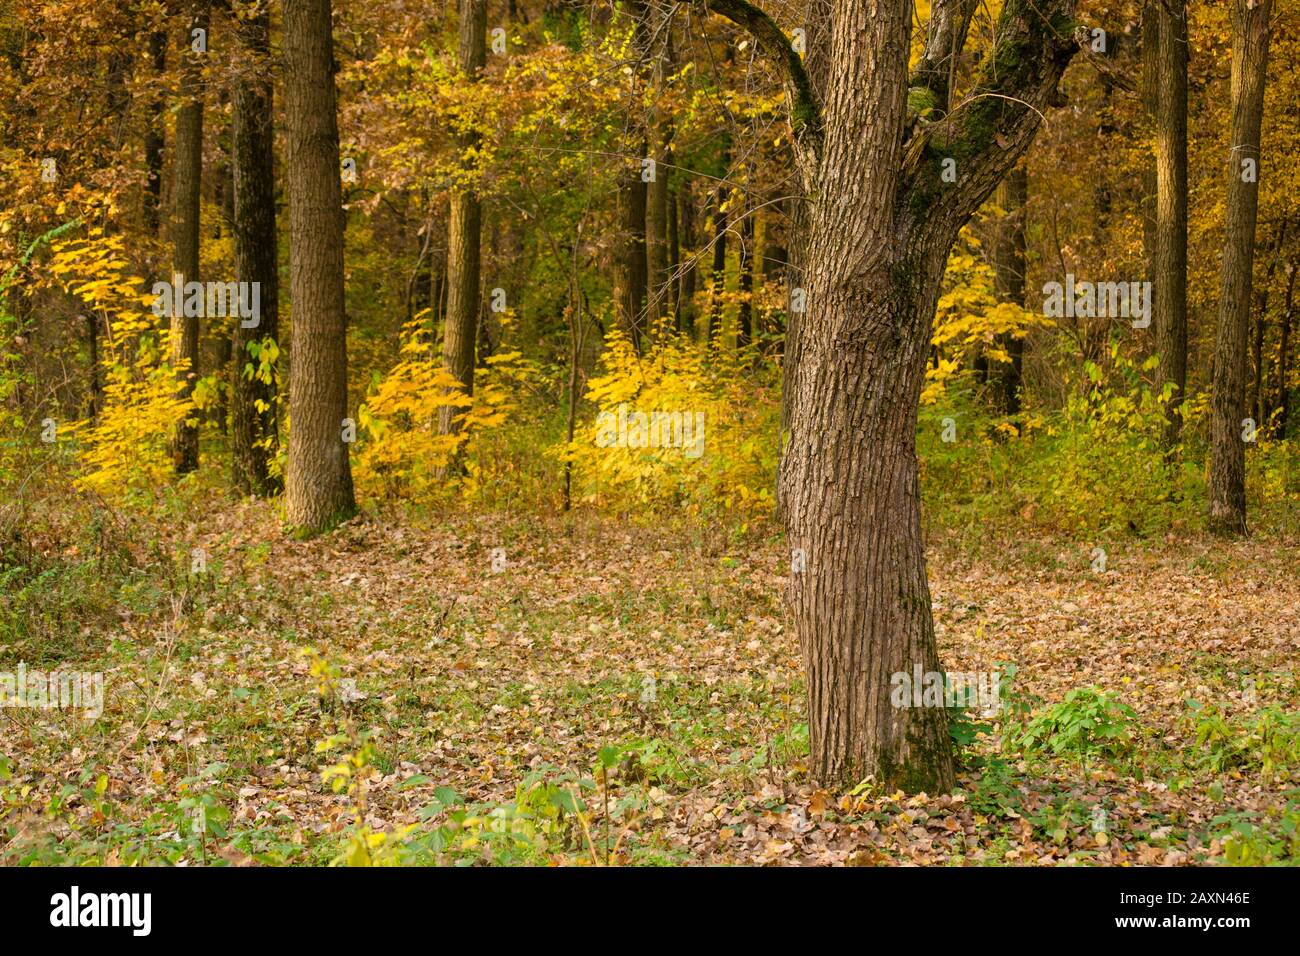 tree bark trunk grows in the autumn forest Stock Photo